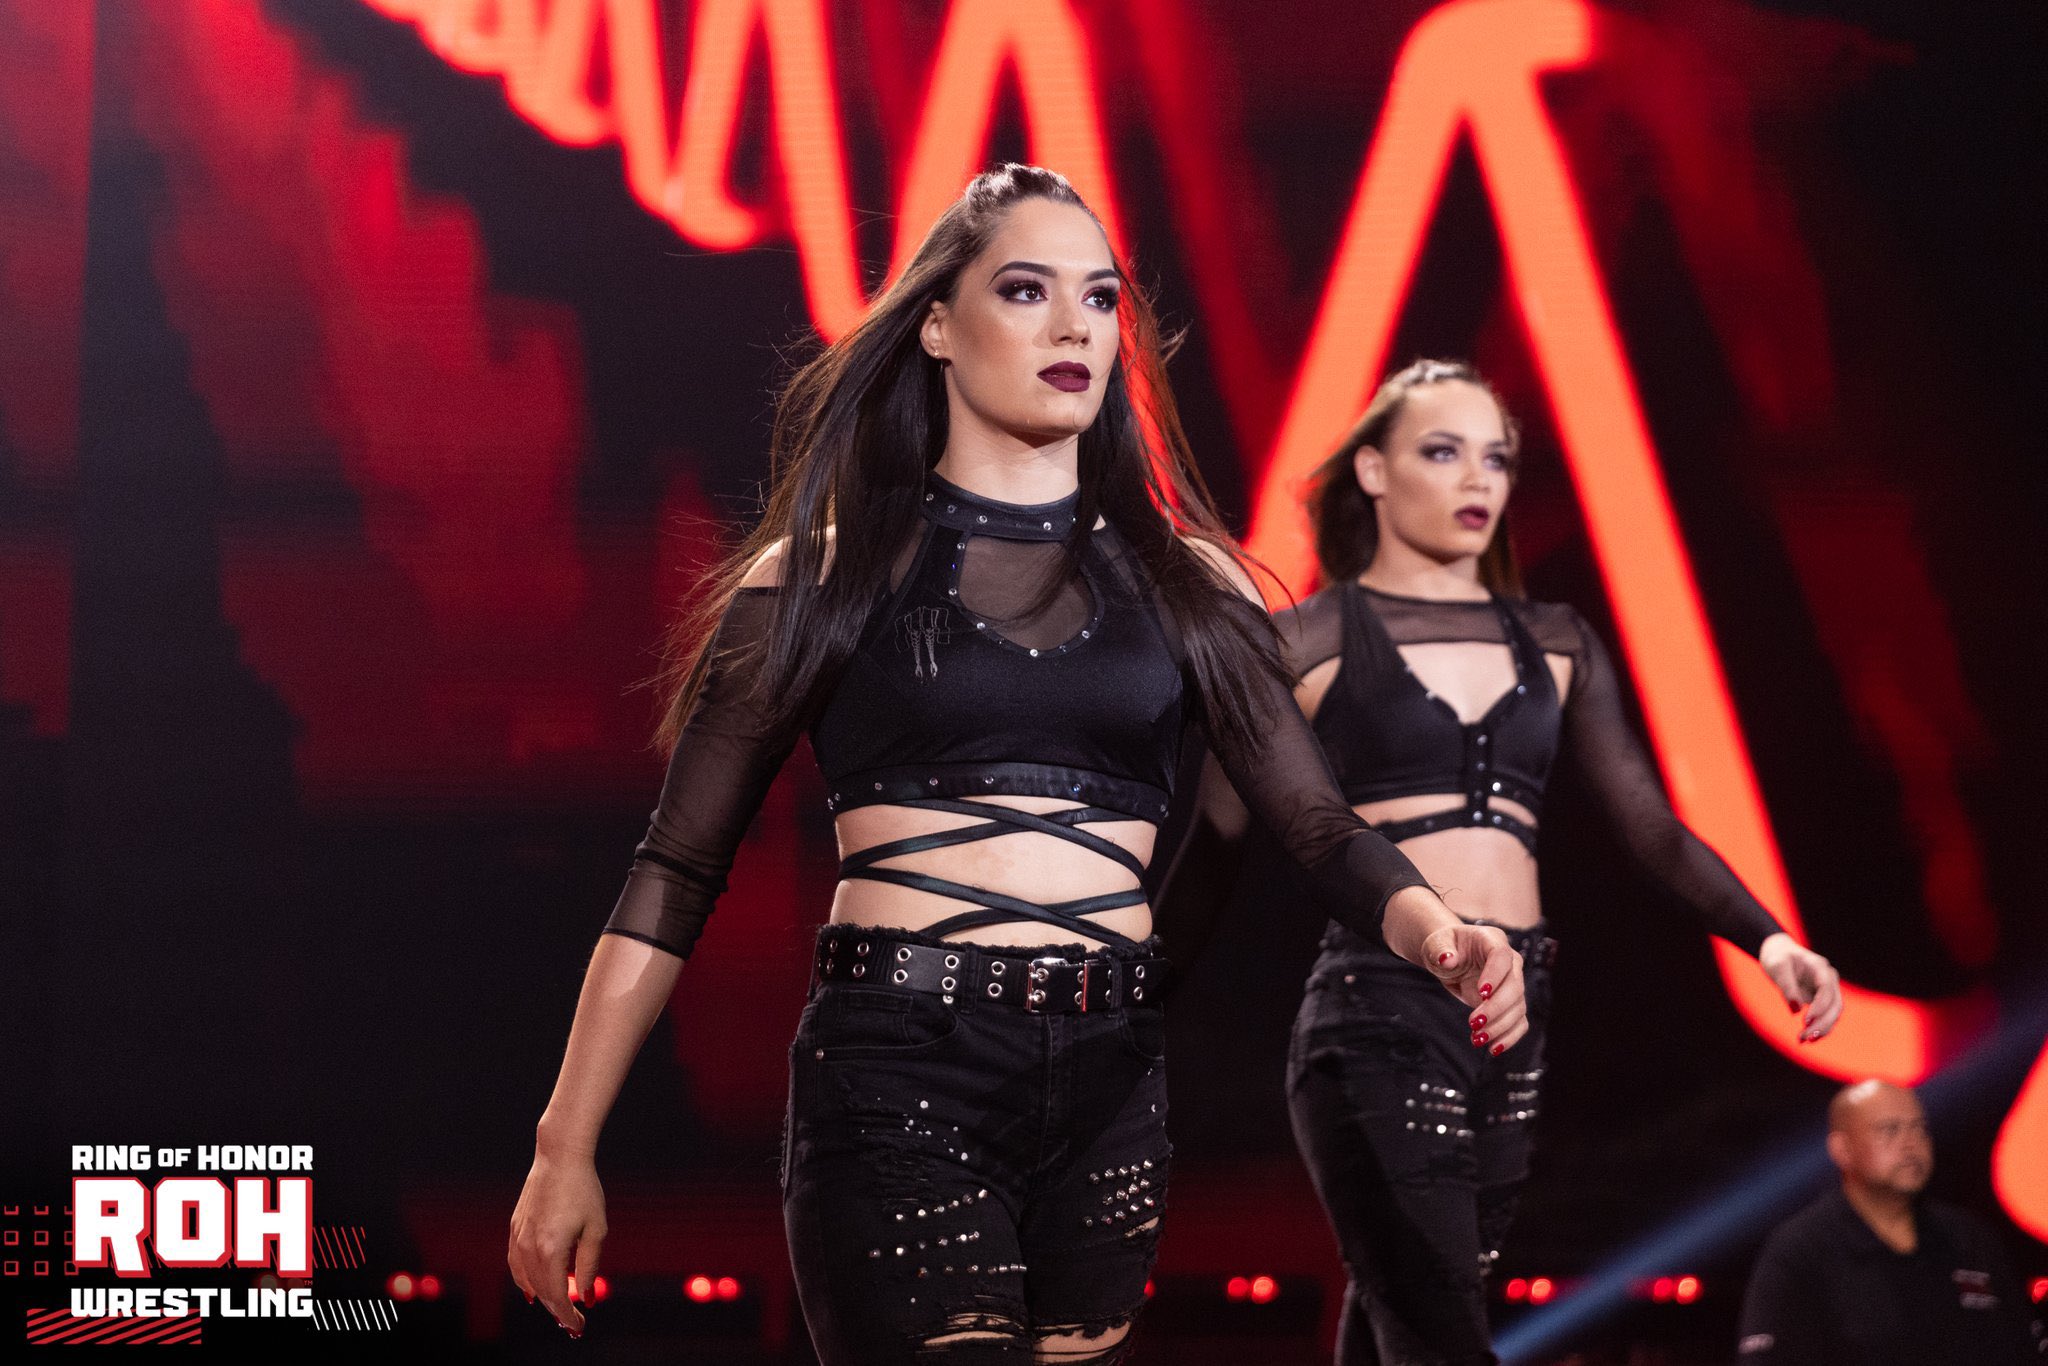 Update On Charlette Renegade Missing From AEW/ROH TV *Updated*